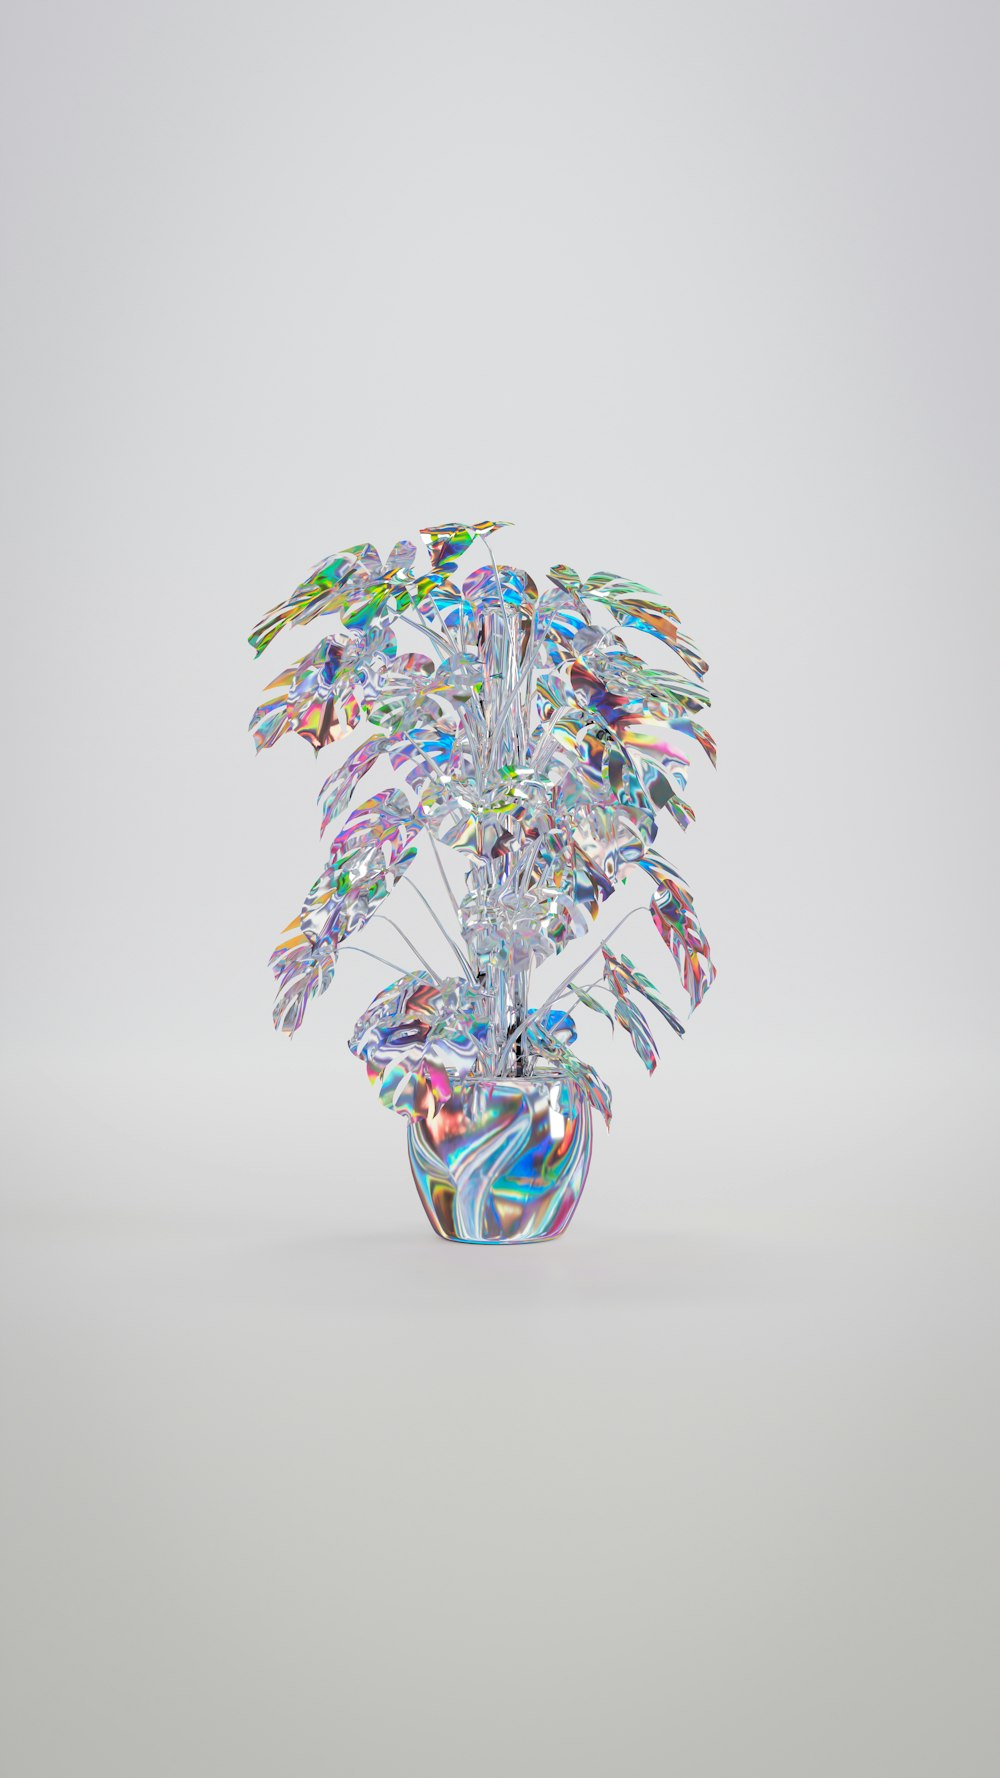 a glass sculpture of a tree with colorful leaves